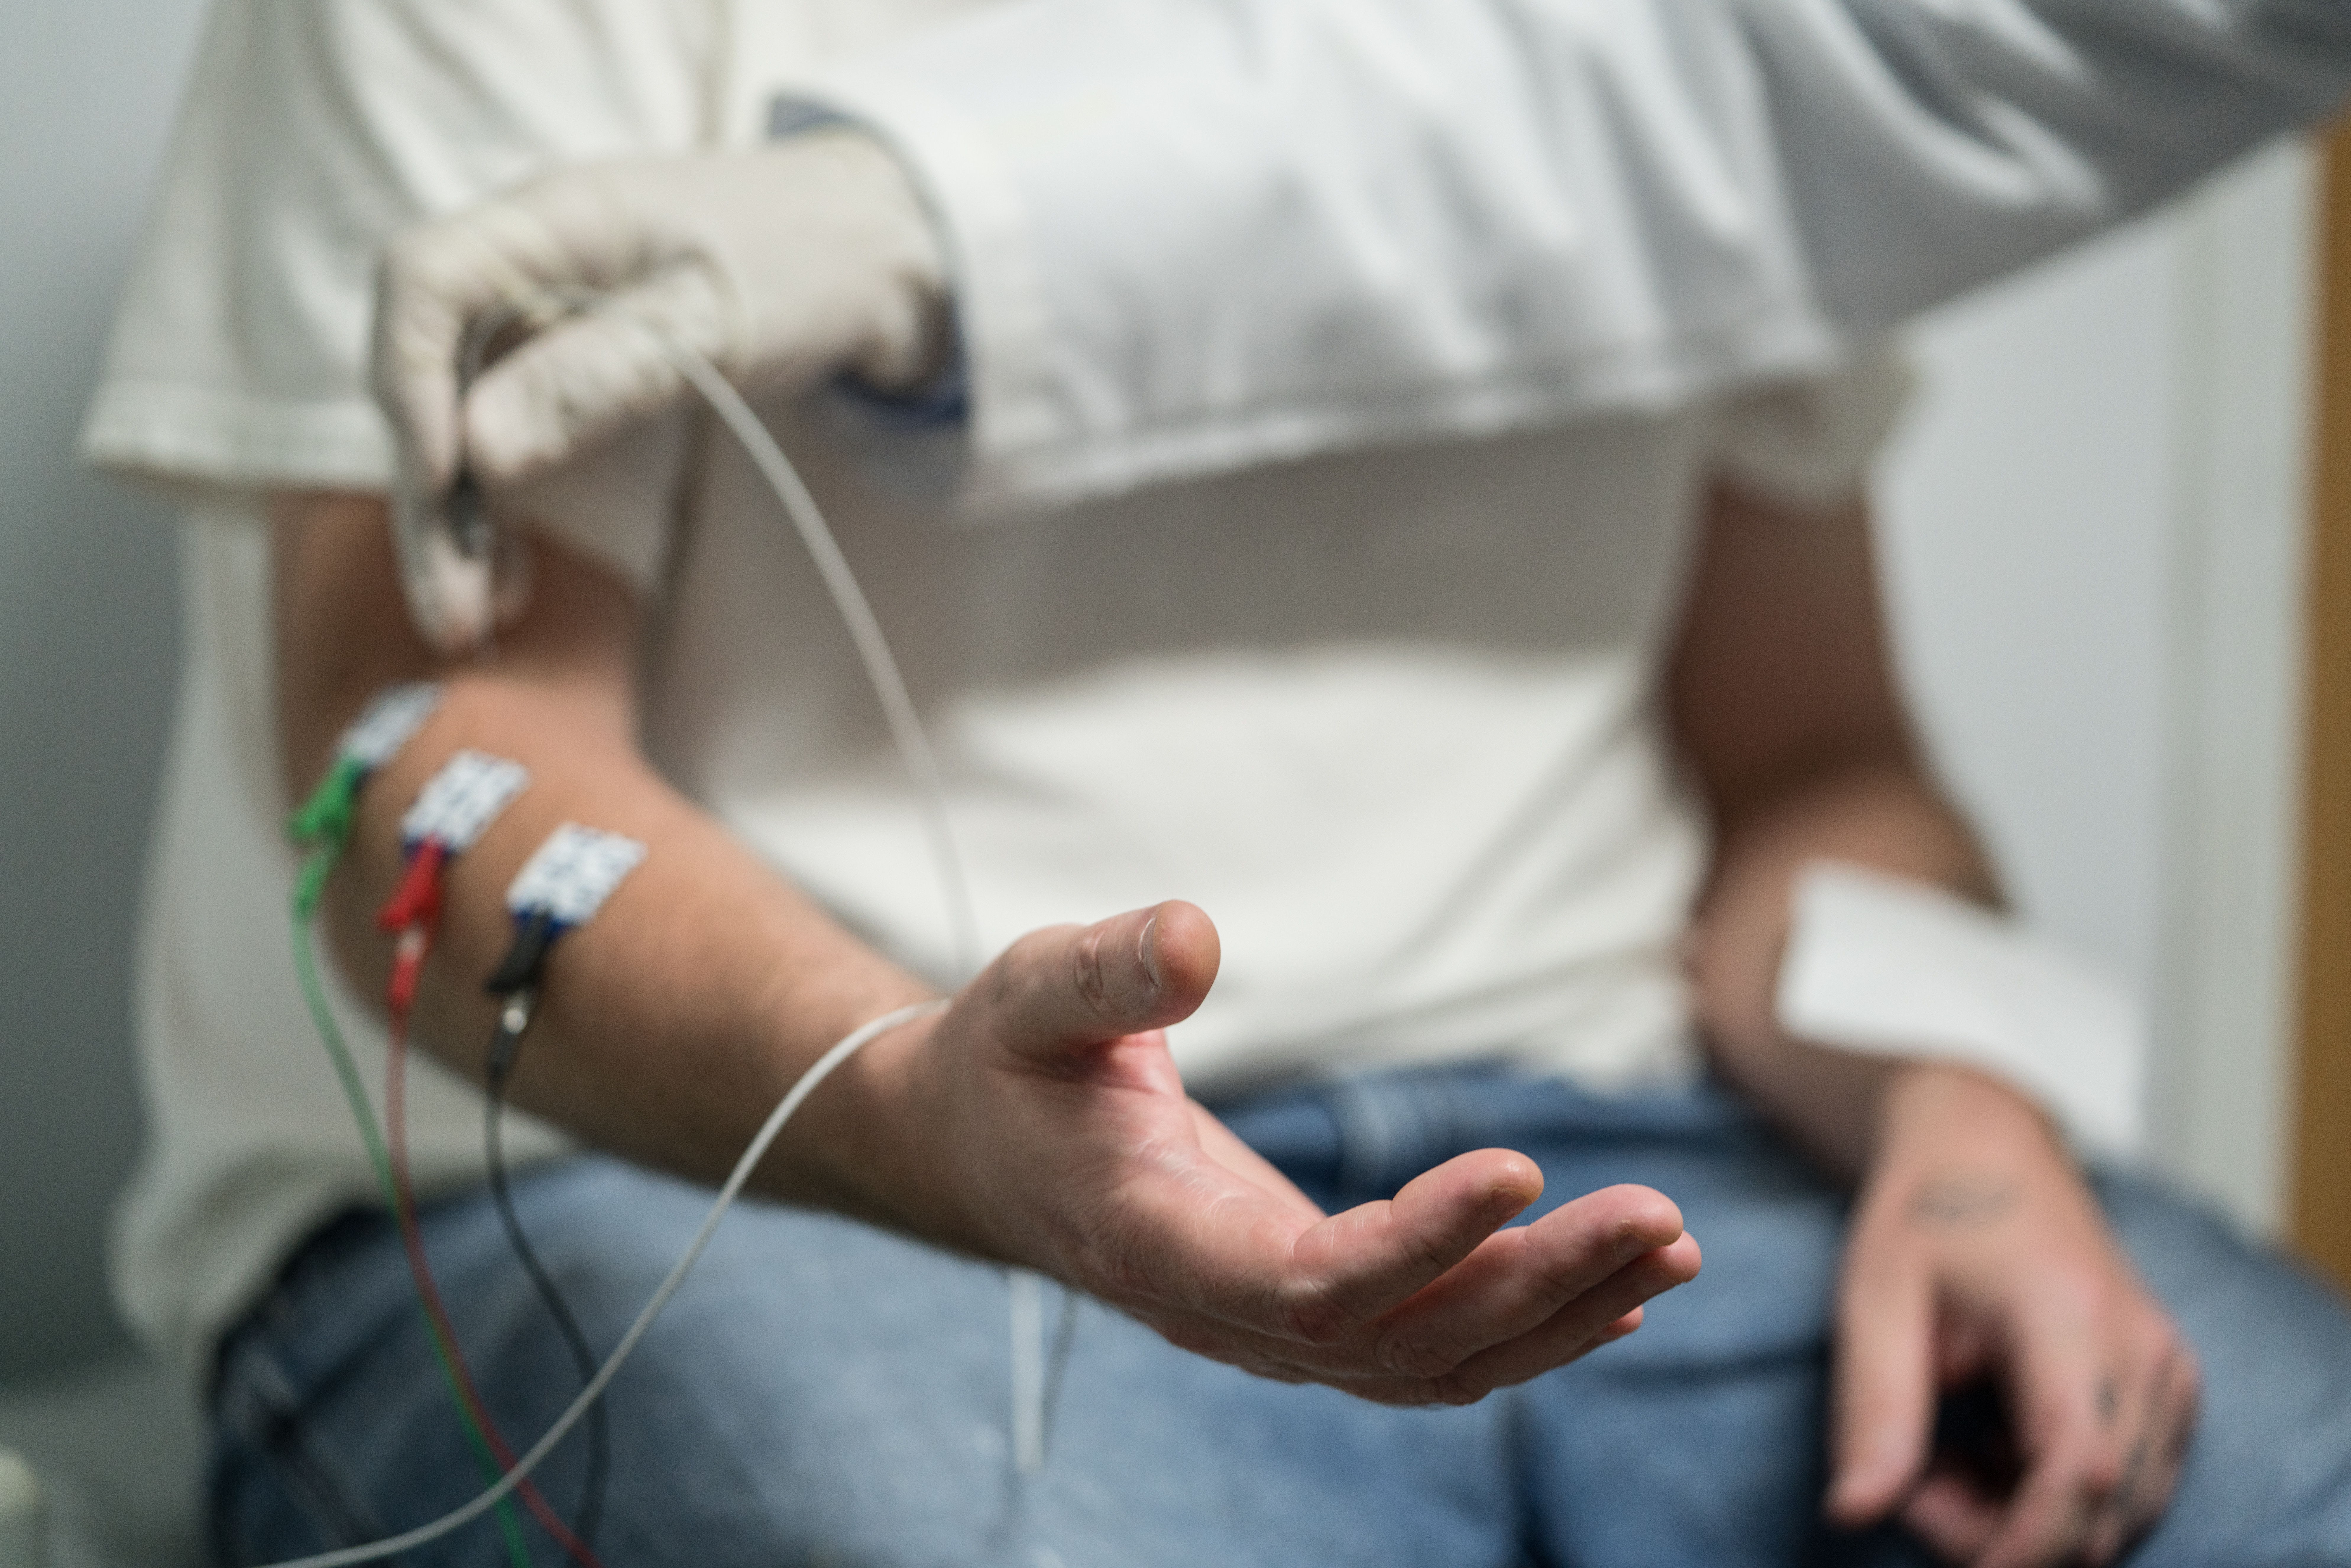 Can ALS Be Diagnosed with an EMG Test Alone?